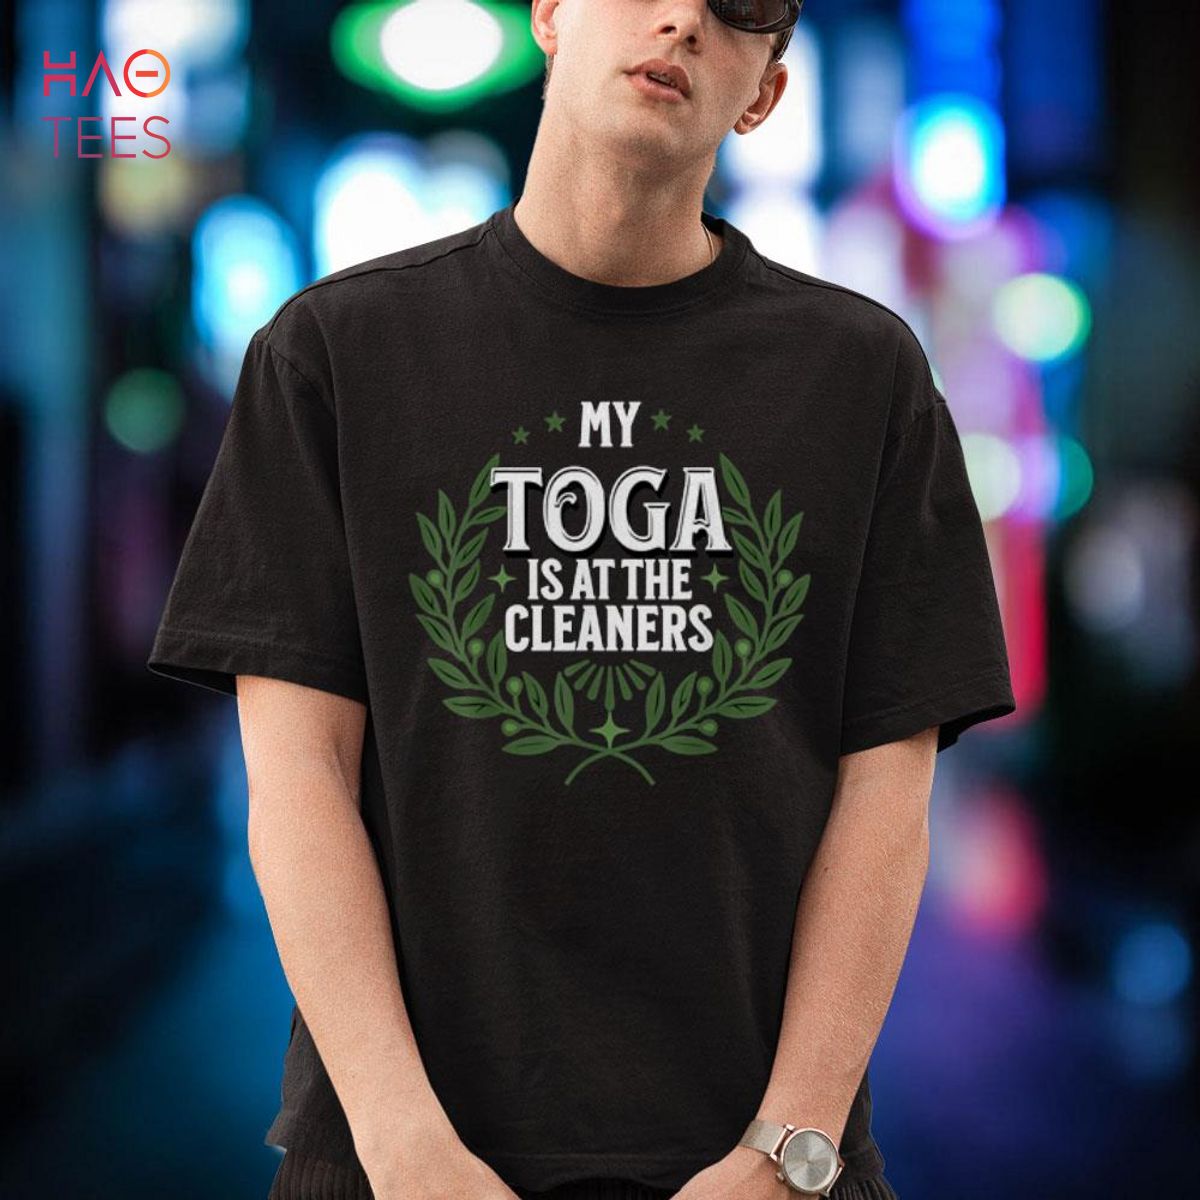 My Toga is at the Cleaners, Funny Toga Party Shirt